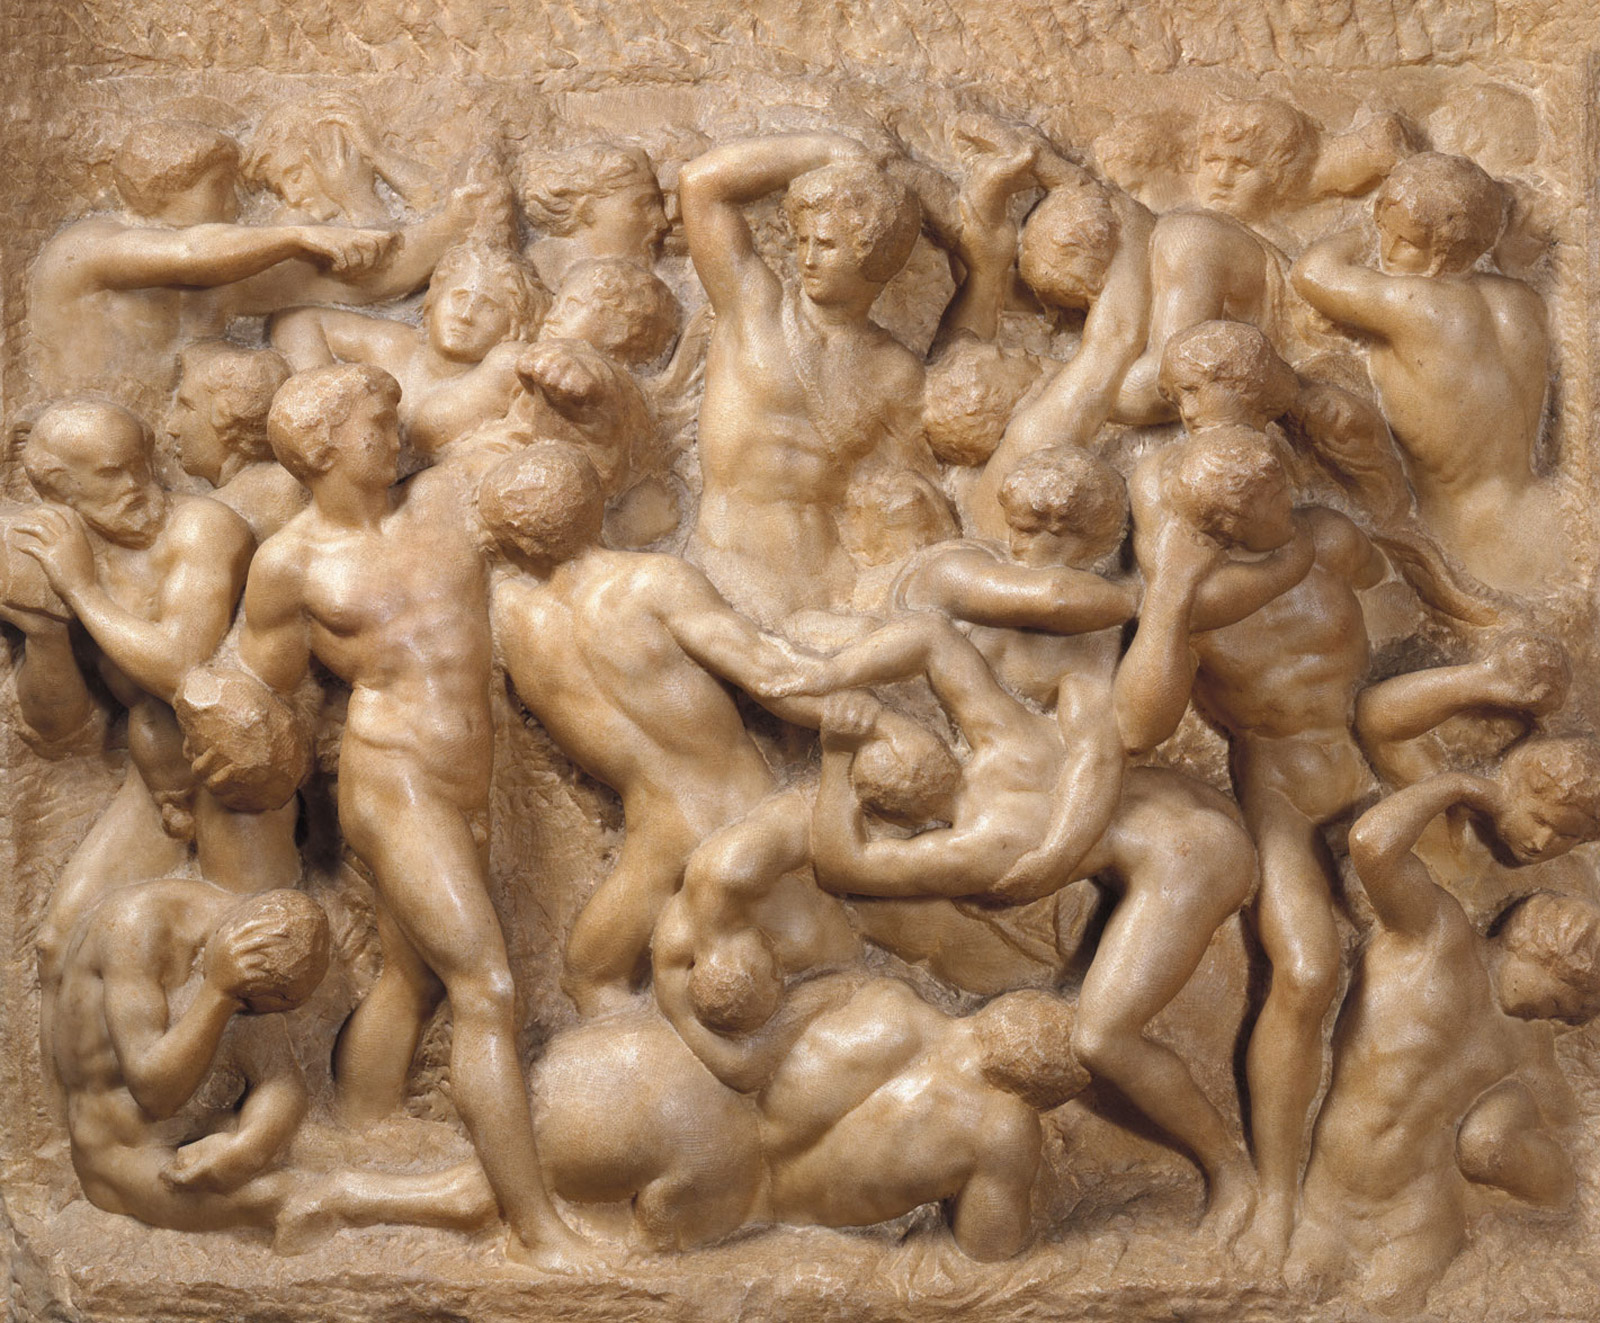 A photograph of the relief sculpture entitled The Battle of Lapiths and Centaurs, which Michelangelo made around fourteen ninety-two.